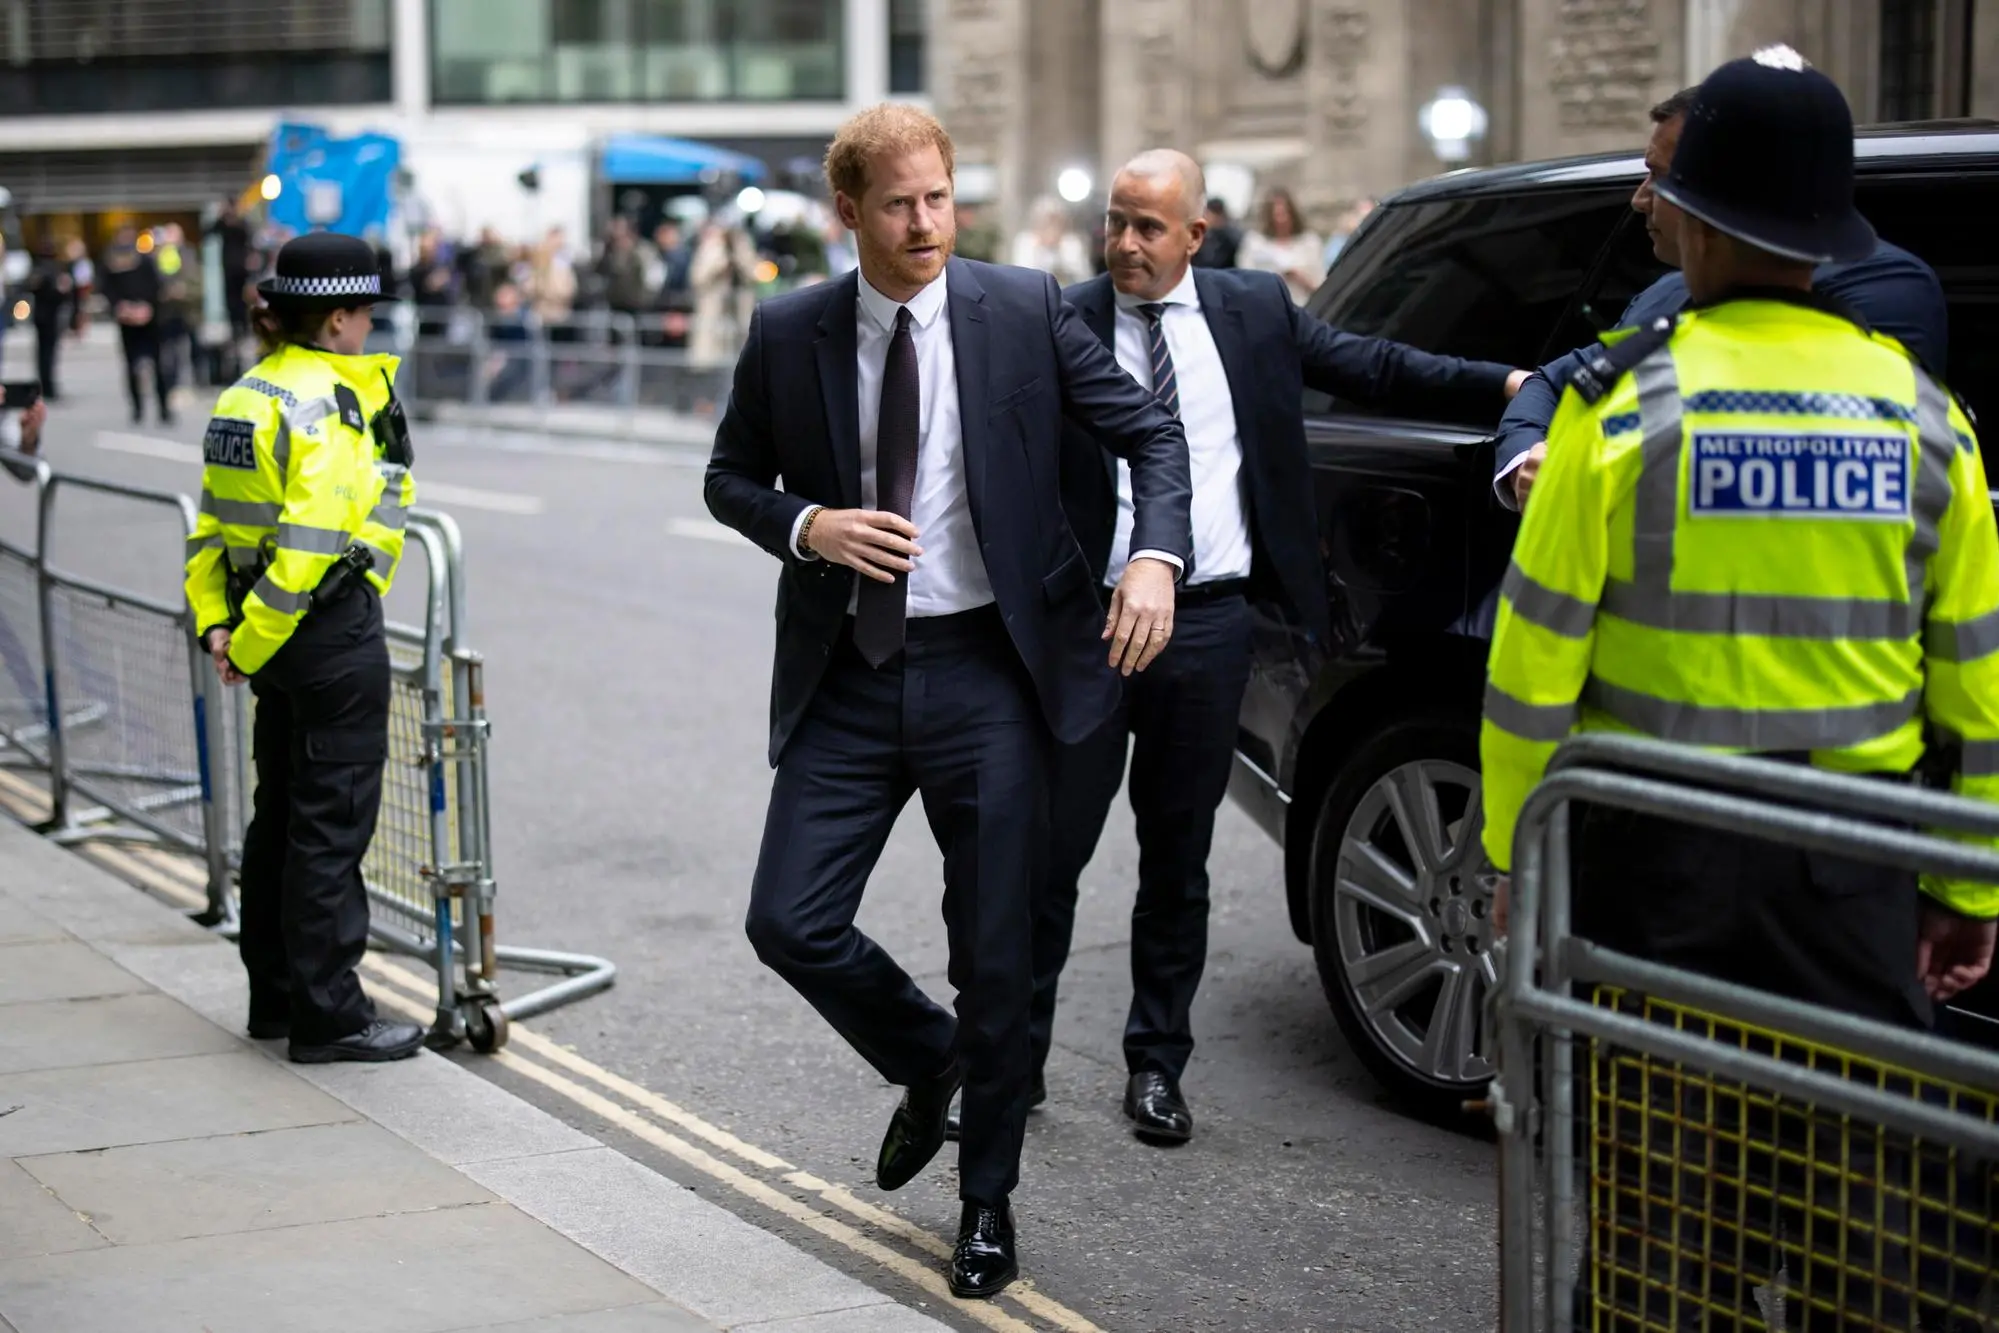 epaselect epa10675414 Britain's Prince Harry (C) arrives at the High Court in London, Britain, 06 June 2023. Prince Harry is to give evidence over the phone hacking trial against the Mirror Group Newspapers. Harry is seeking damages against the Daily Mirror over unlawful information gathering through phone hacking. EPA/TOLGA AKMEN